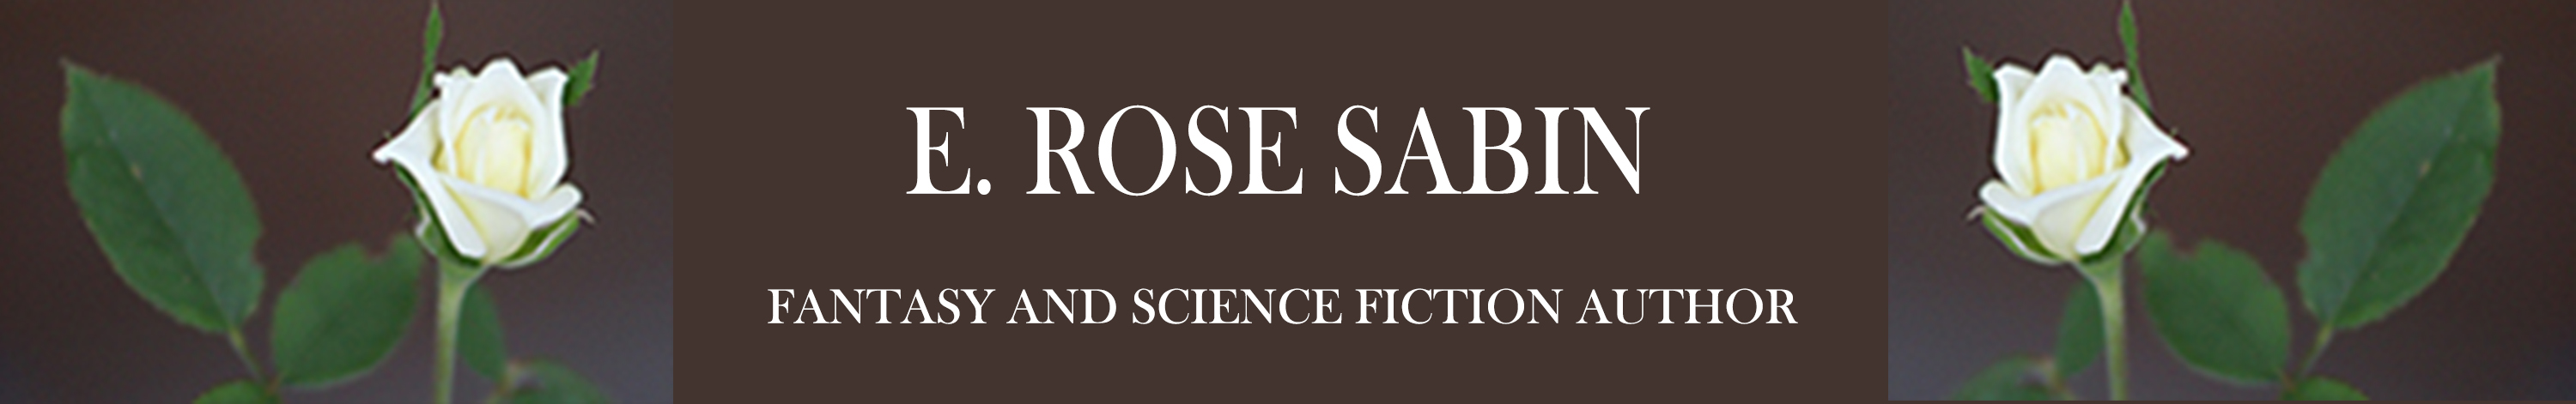 E. Rose Sabin, Fantasy and Science Fiction Author